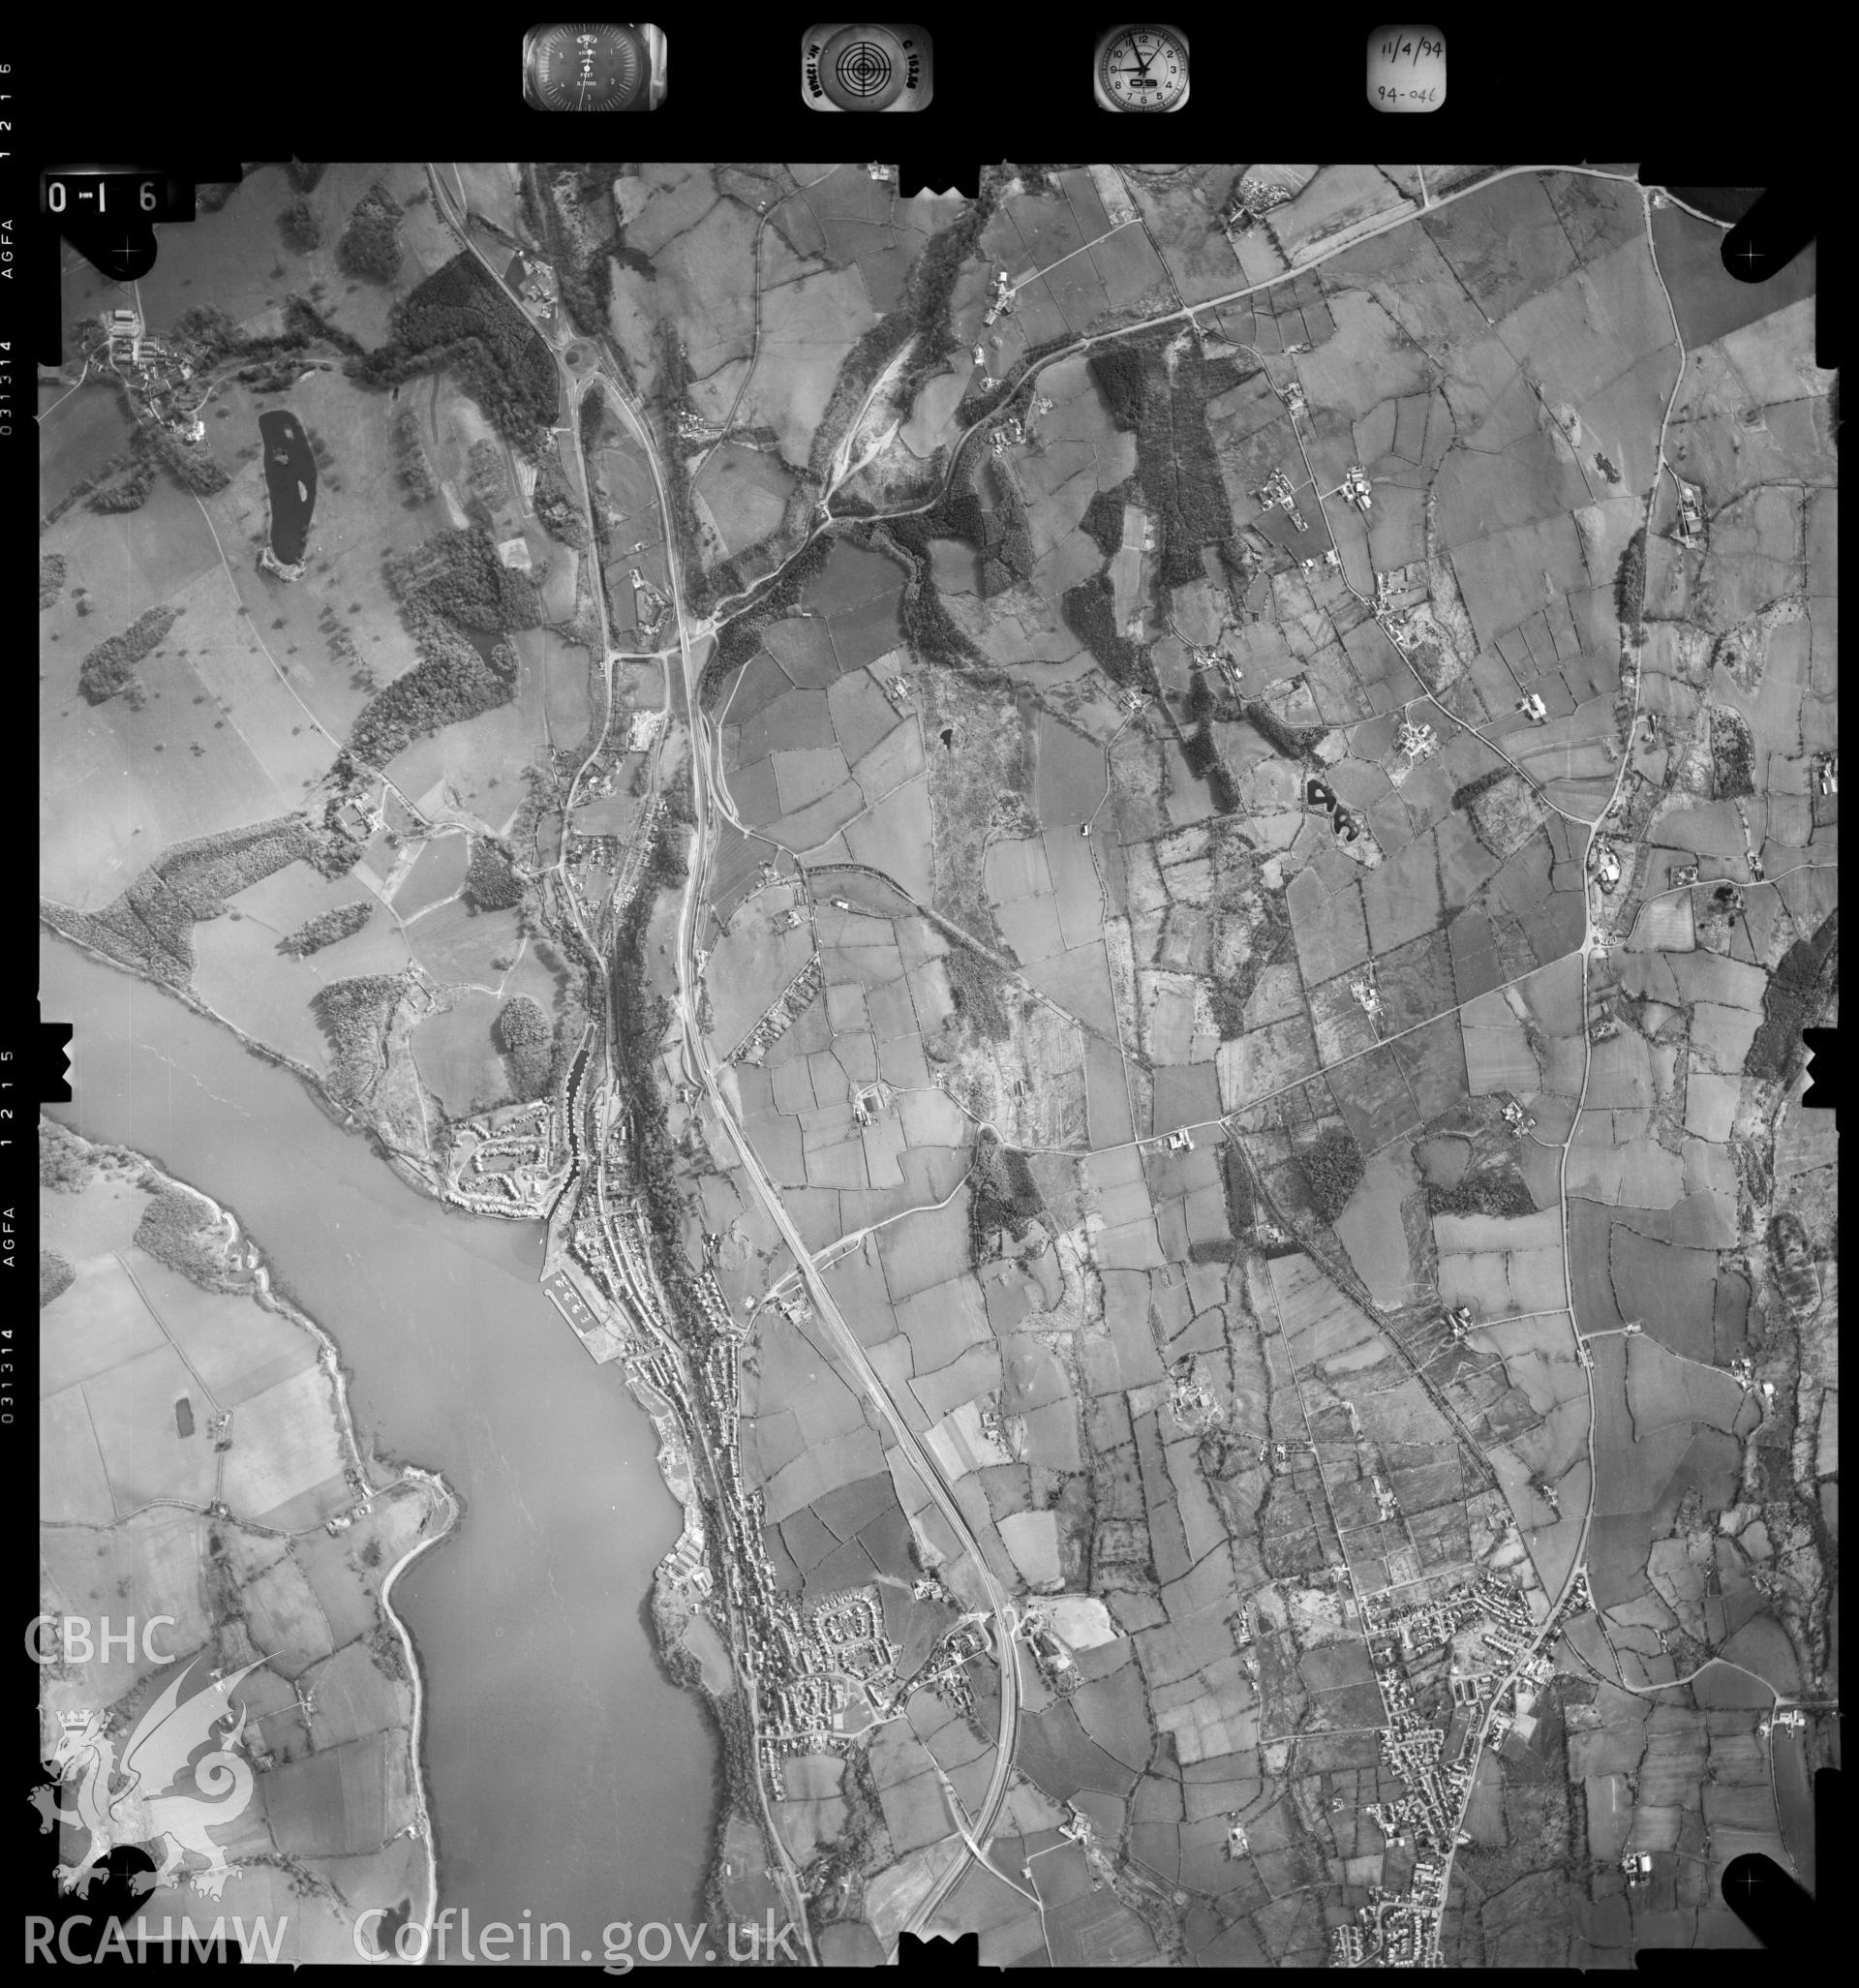 Digitized copy of an aerial photograph showing the Felinheli area, taken by Ordnance Survey, 1994.